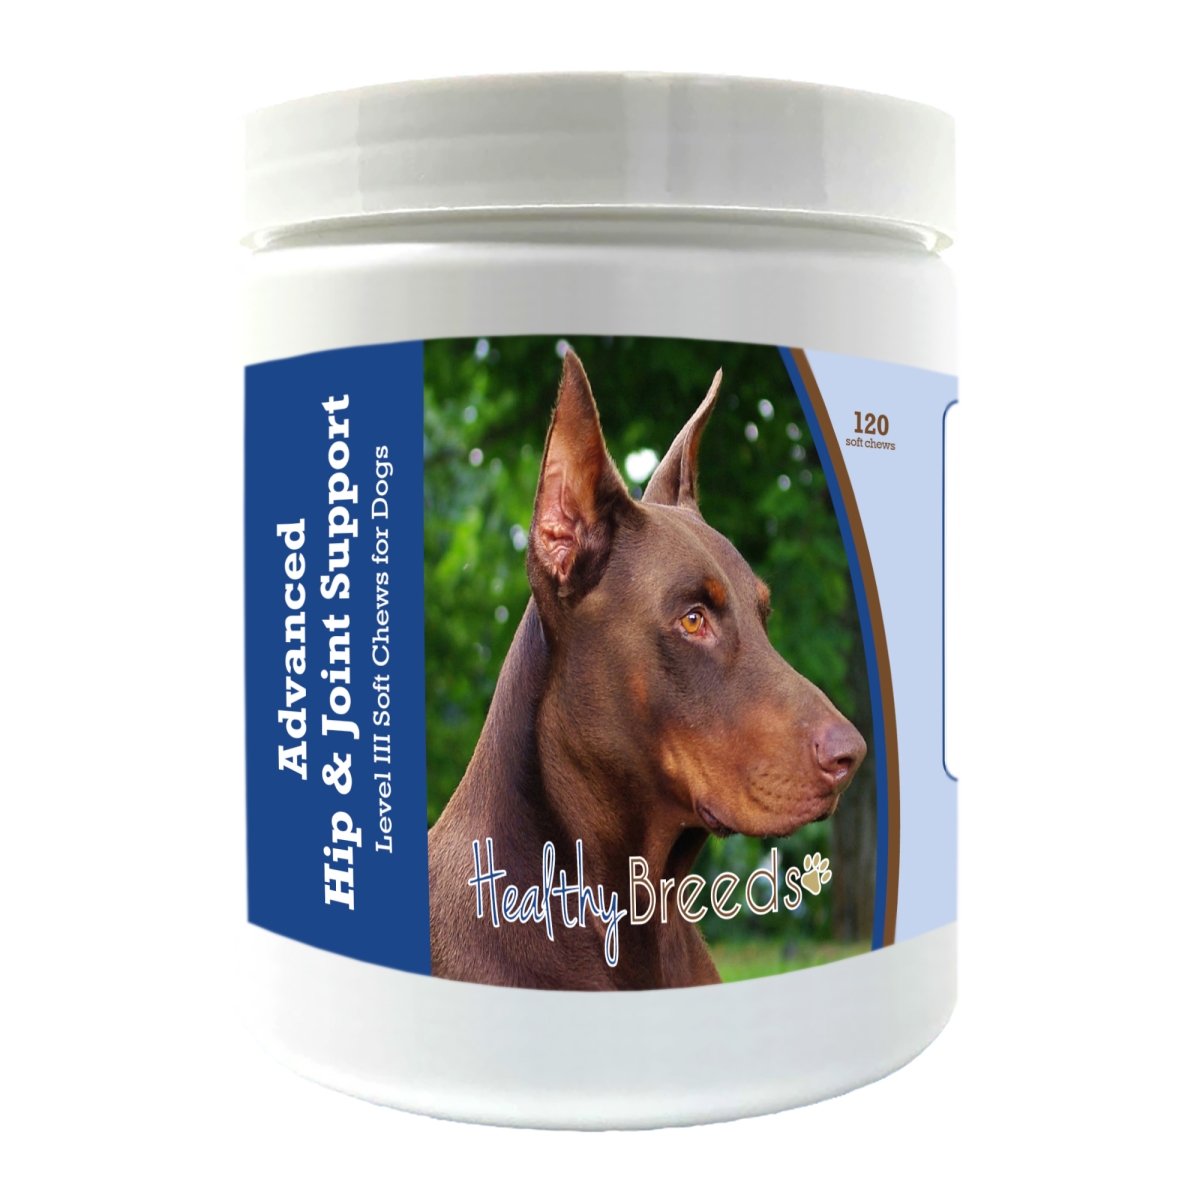 Picture of Healthy Breeds 192959898149 Doberman Pinscher Advanced Hip & Joint Support Level III Soft Chews for Dogs